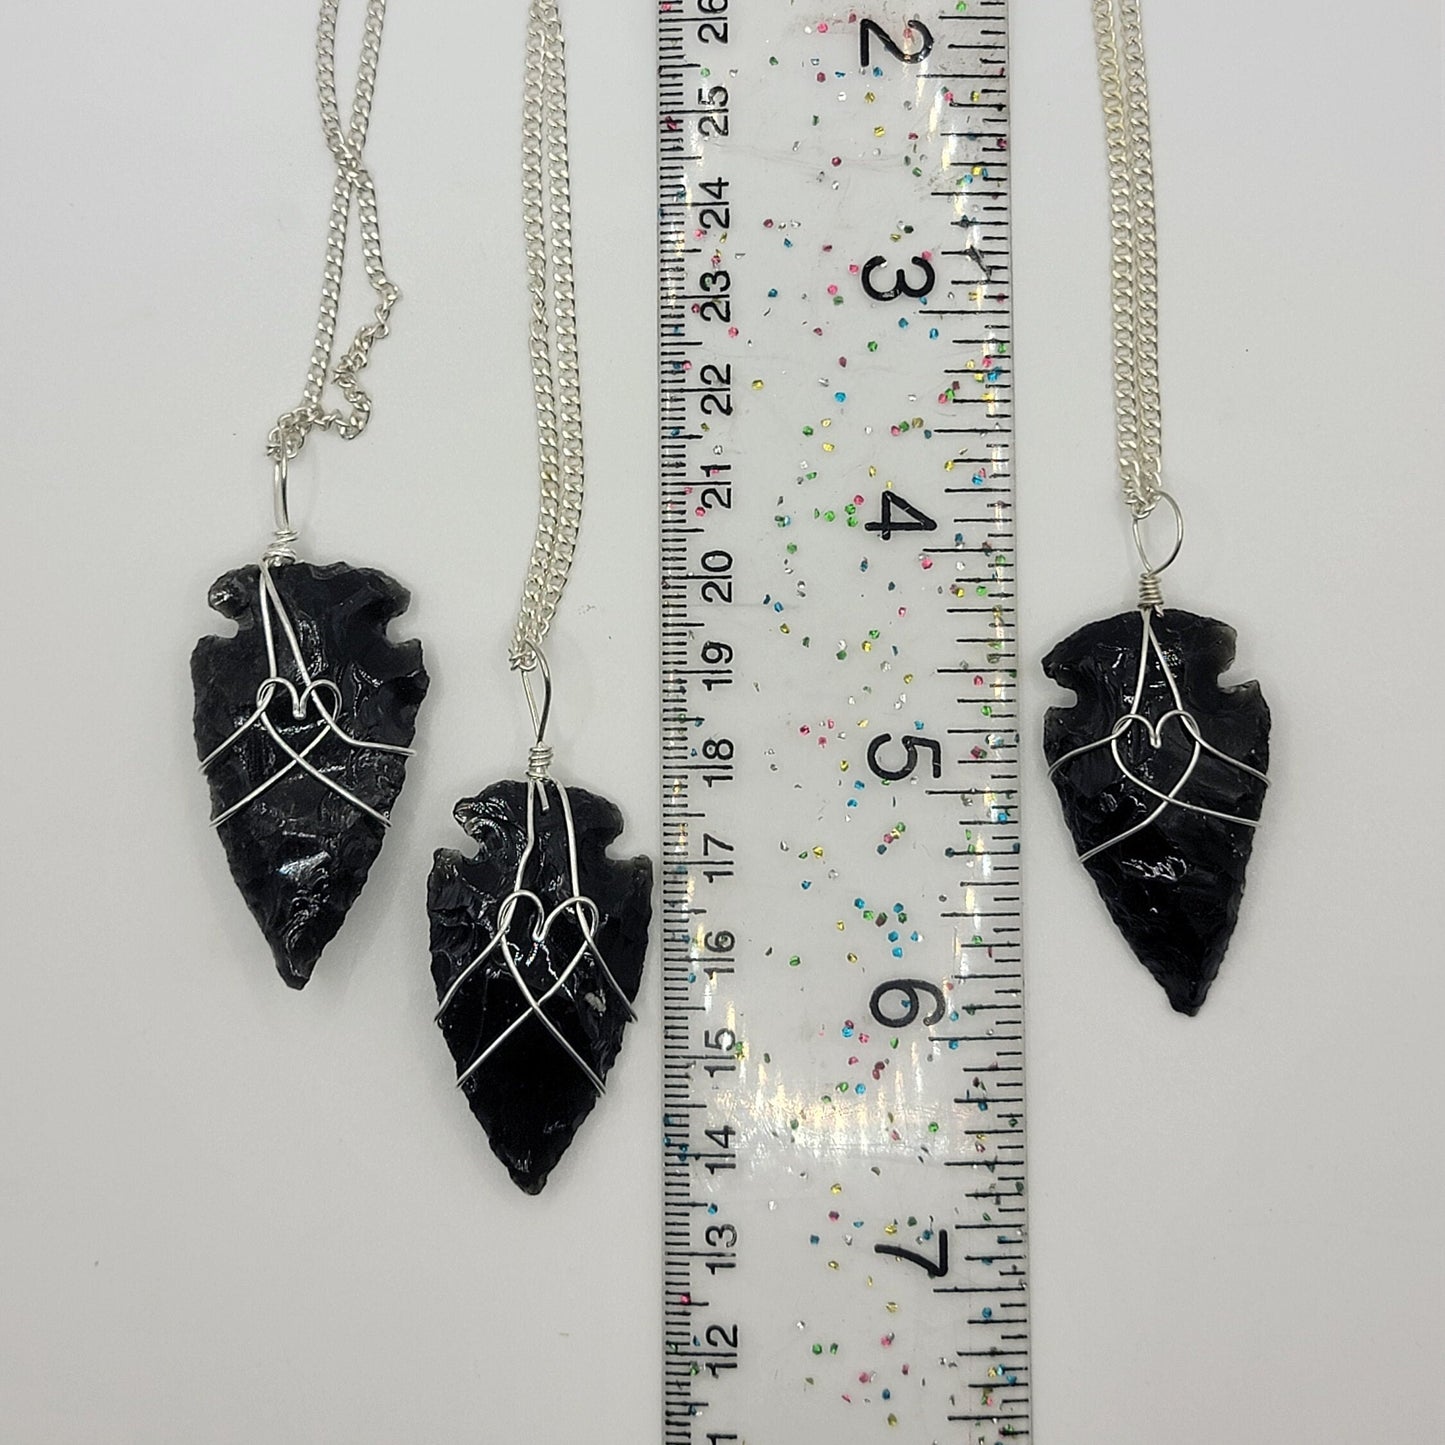 black obsidian 1 1/2" arrowhead, silver wire wrapped, handmade, pendant attarched to a silver chain, displayed next to a ruler